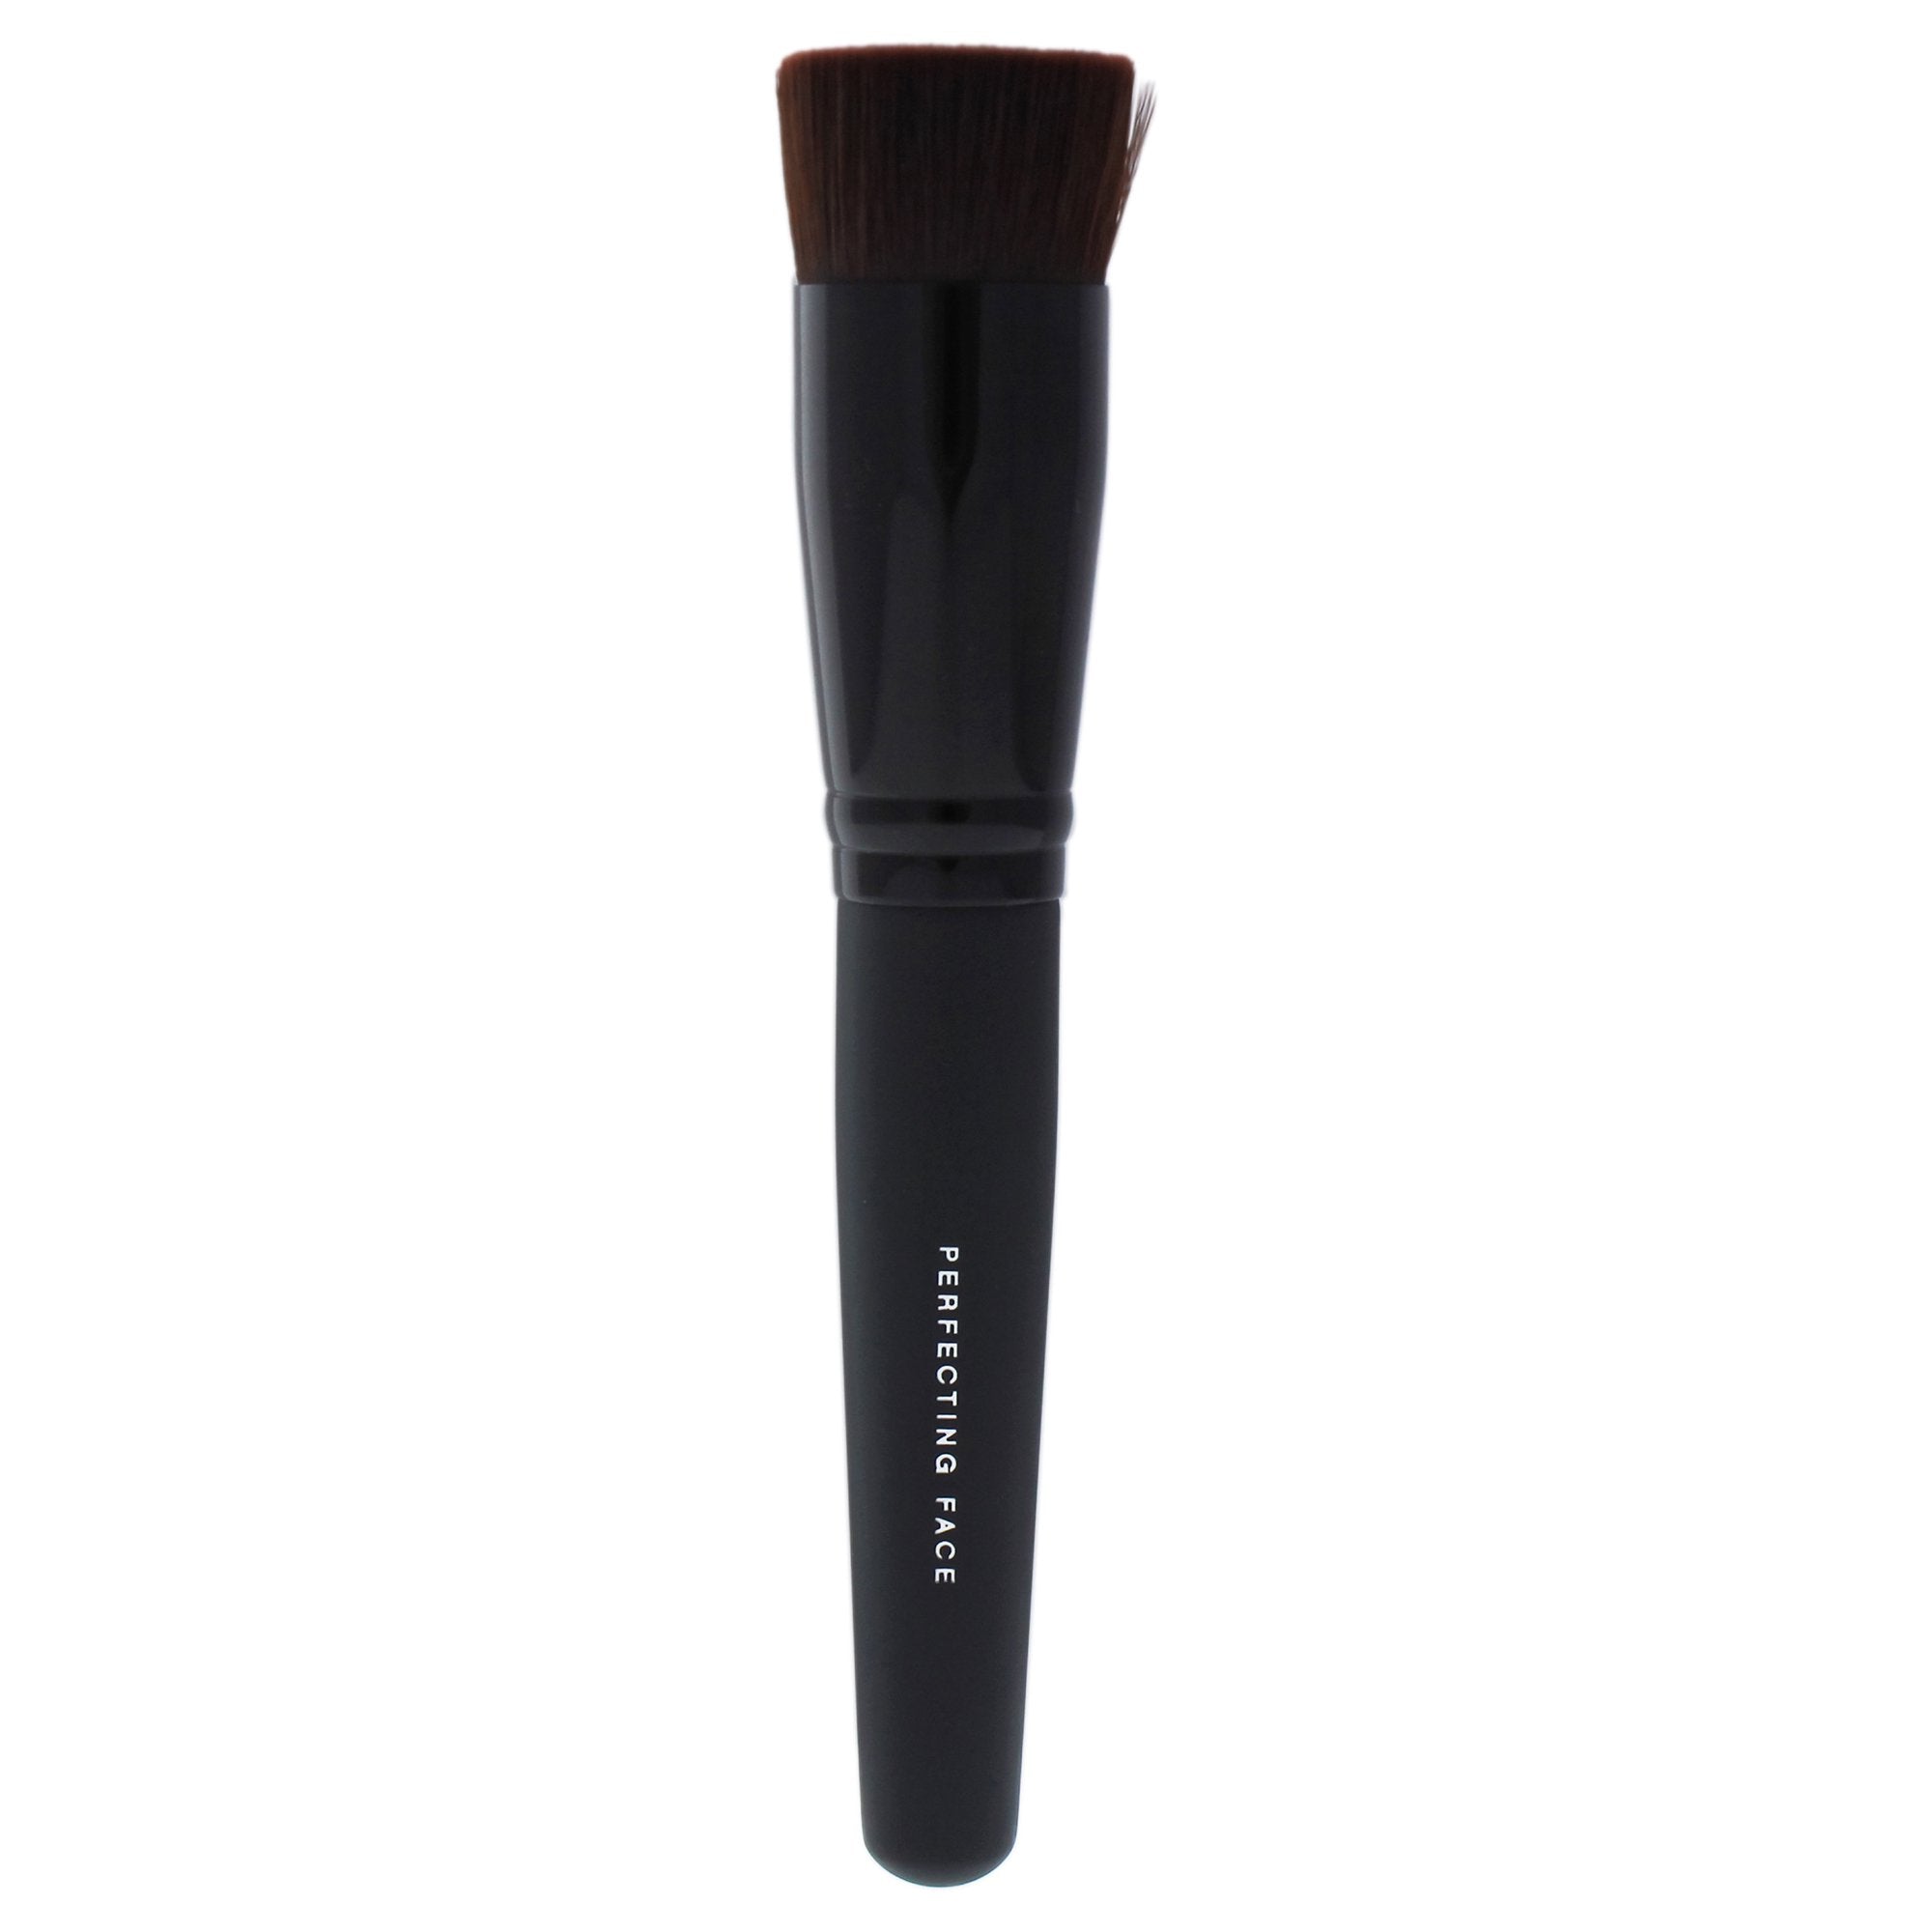 WHOLESALE BAREMINERALS PERFECTING FACE BRUSH - 50 PIECE LOT